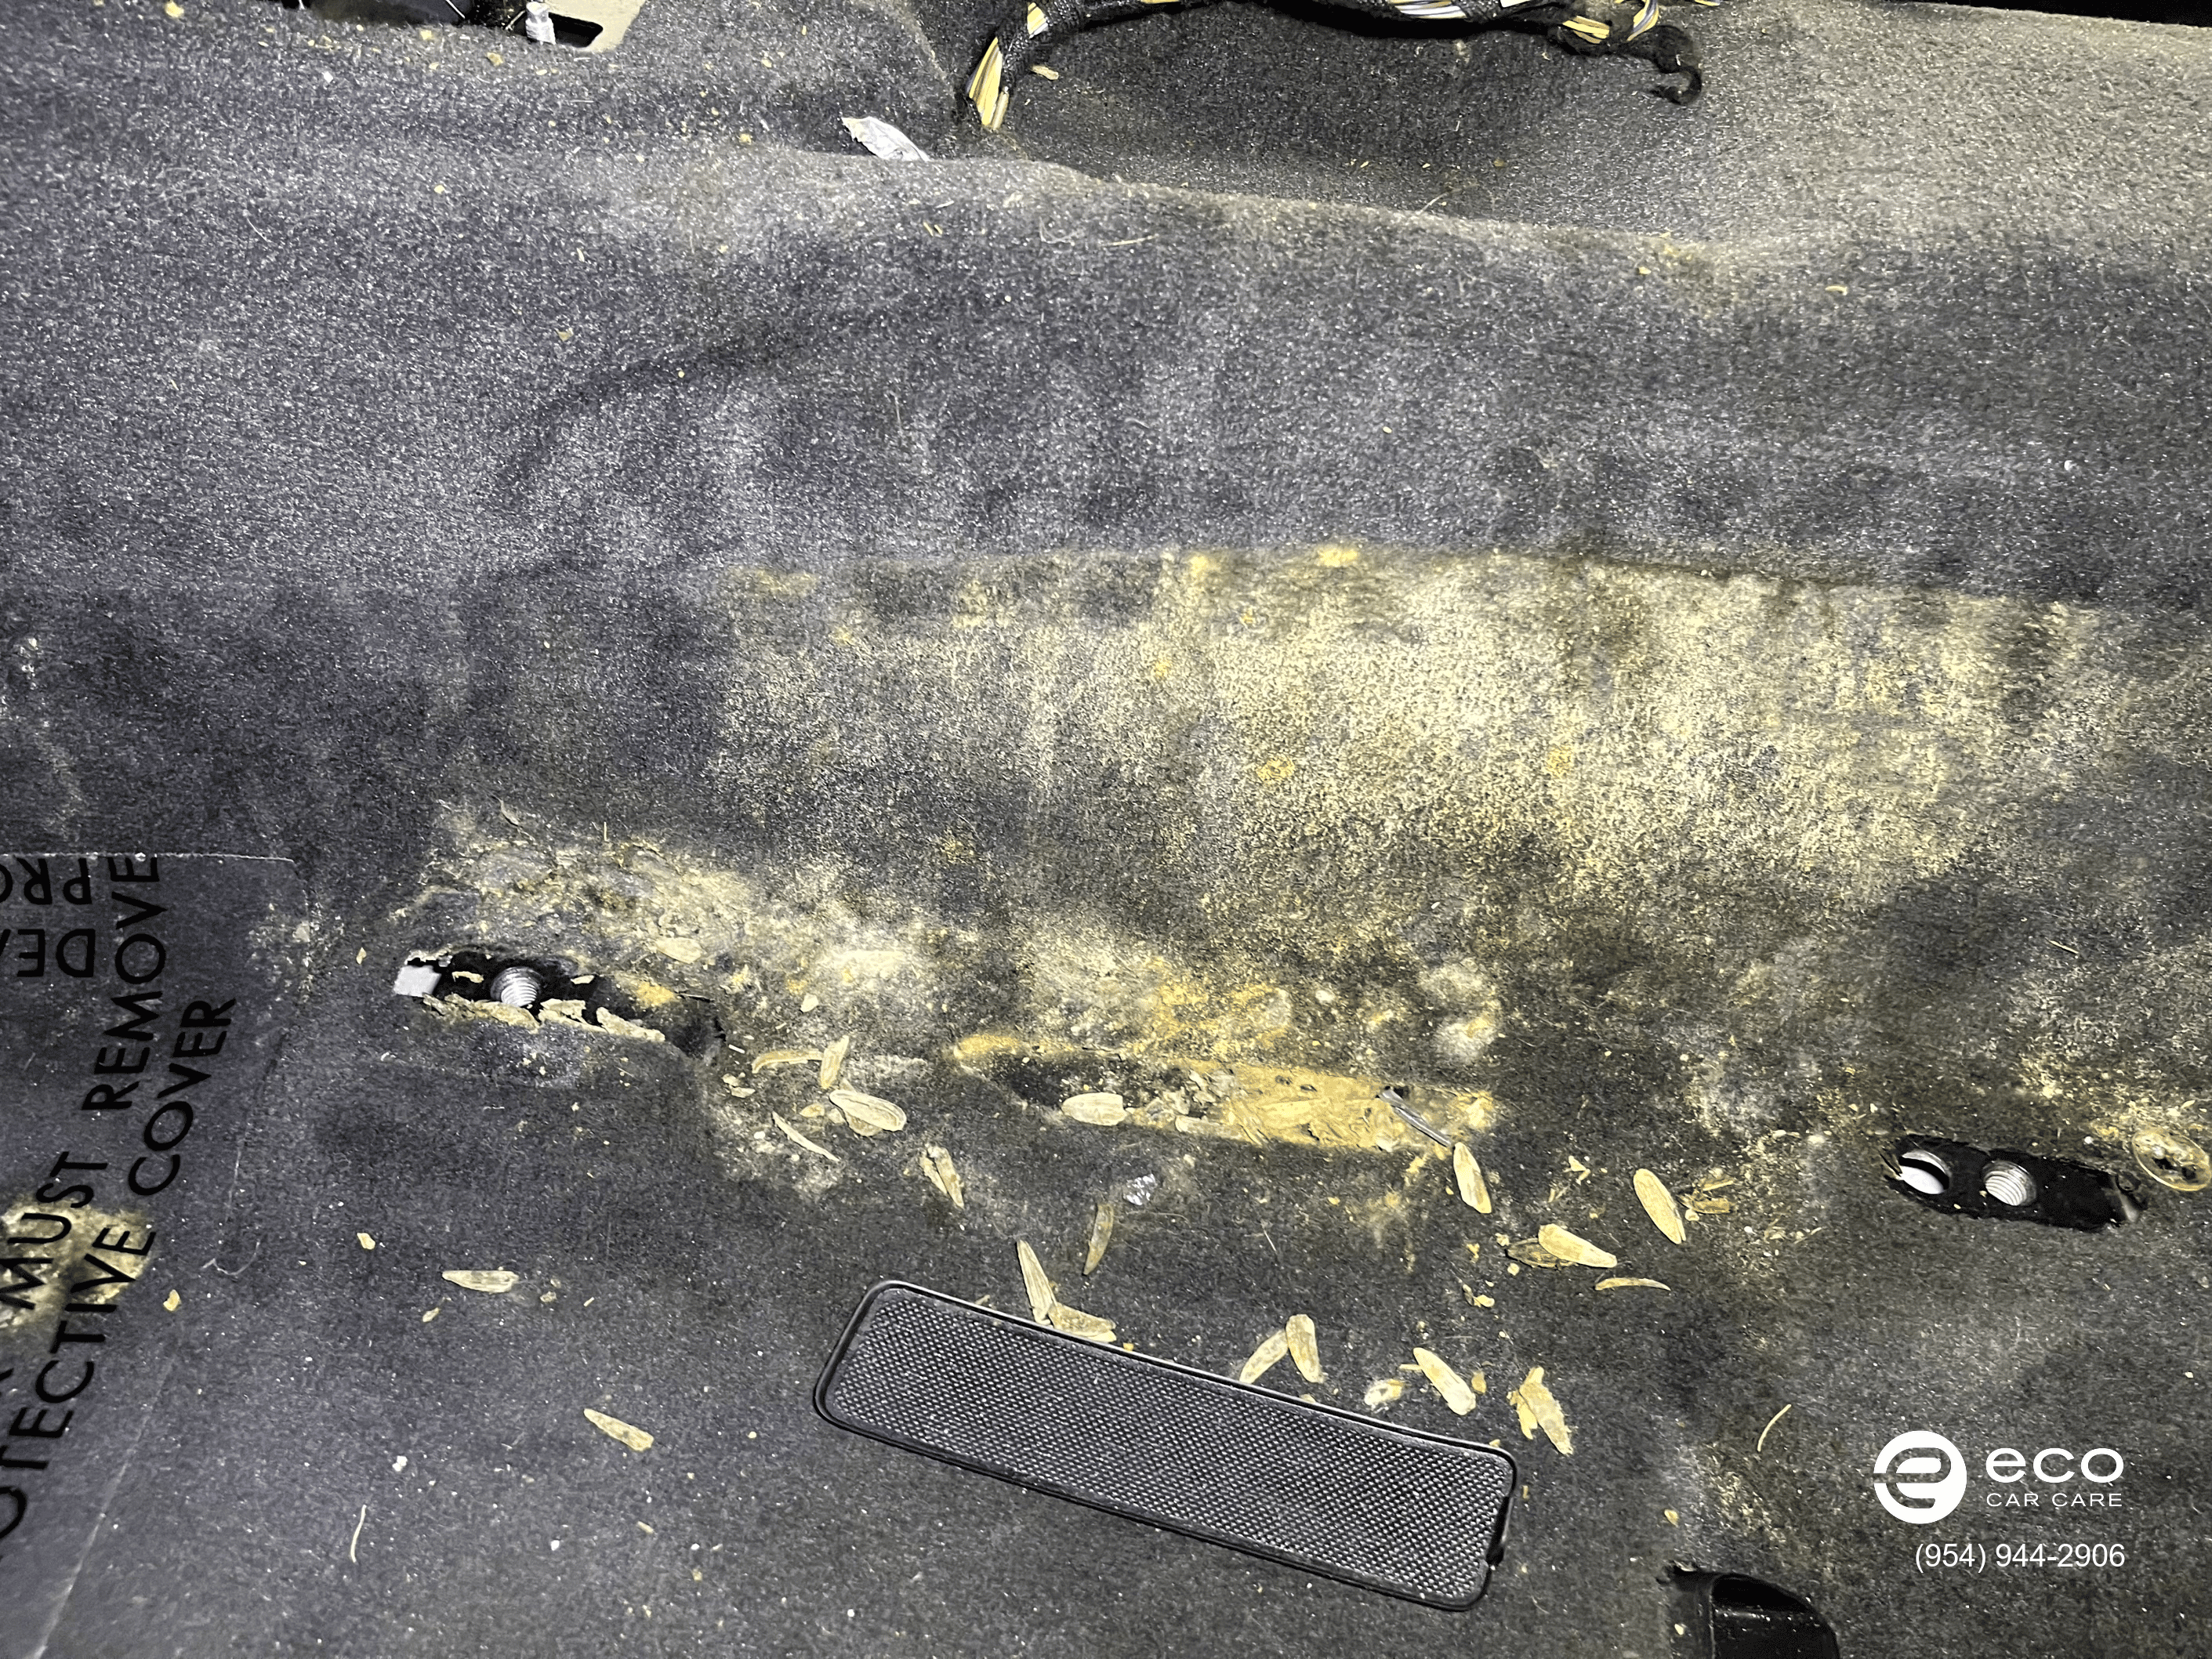 mold removal from car near me